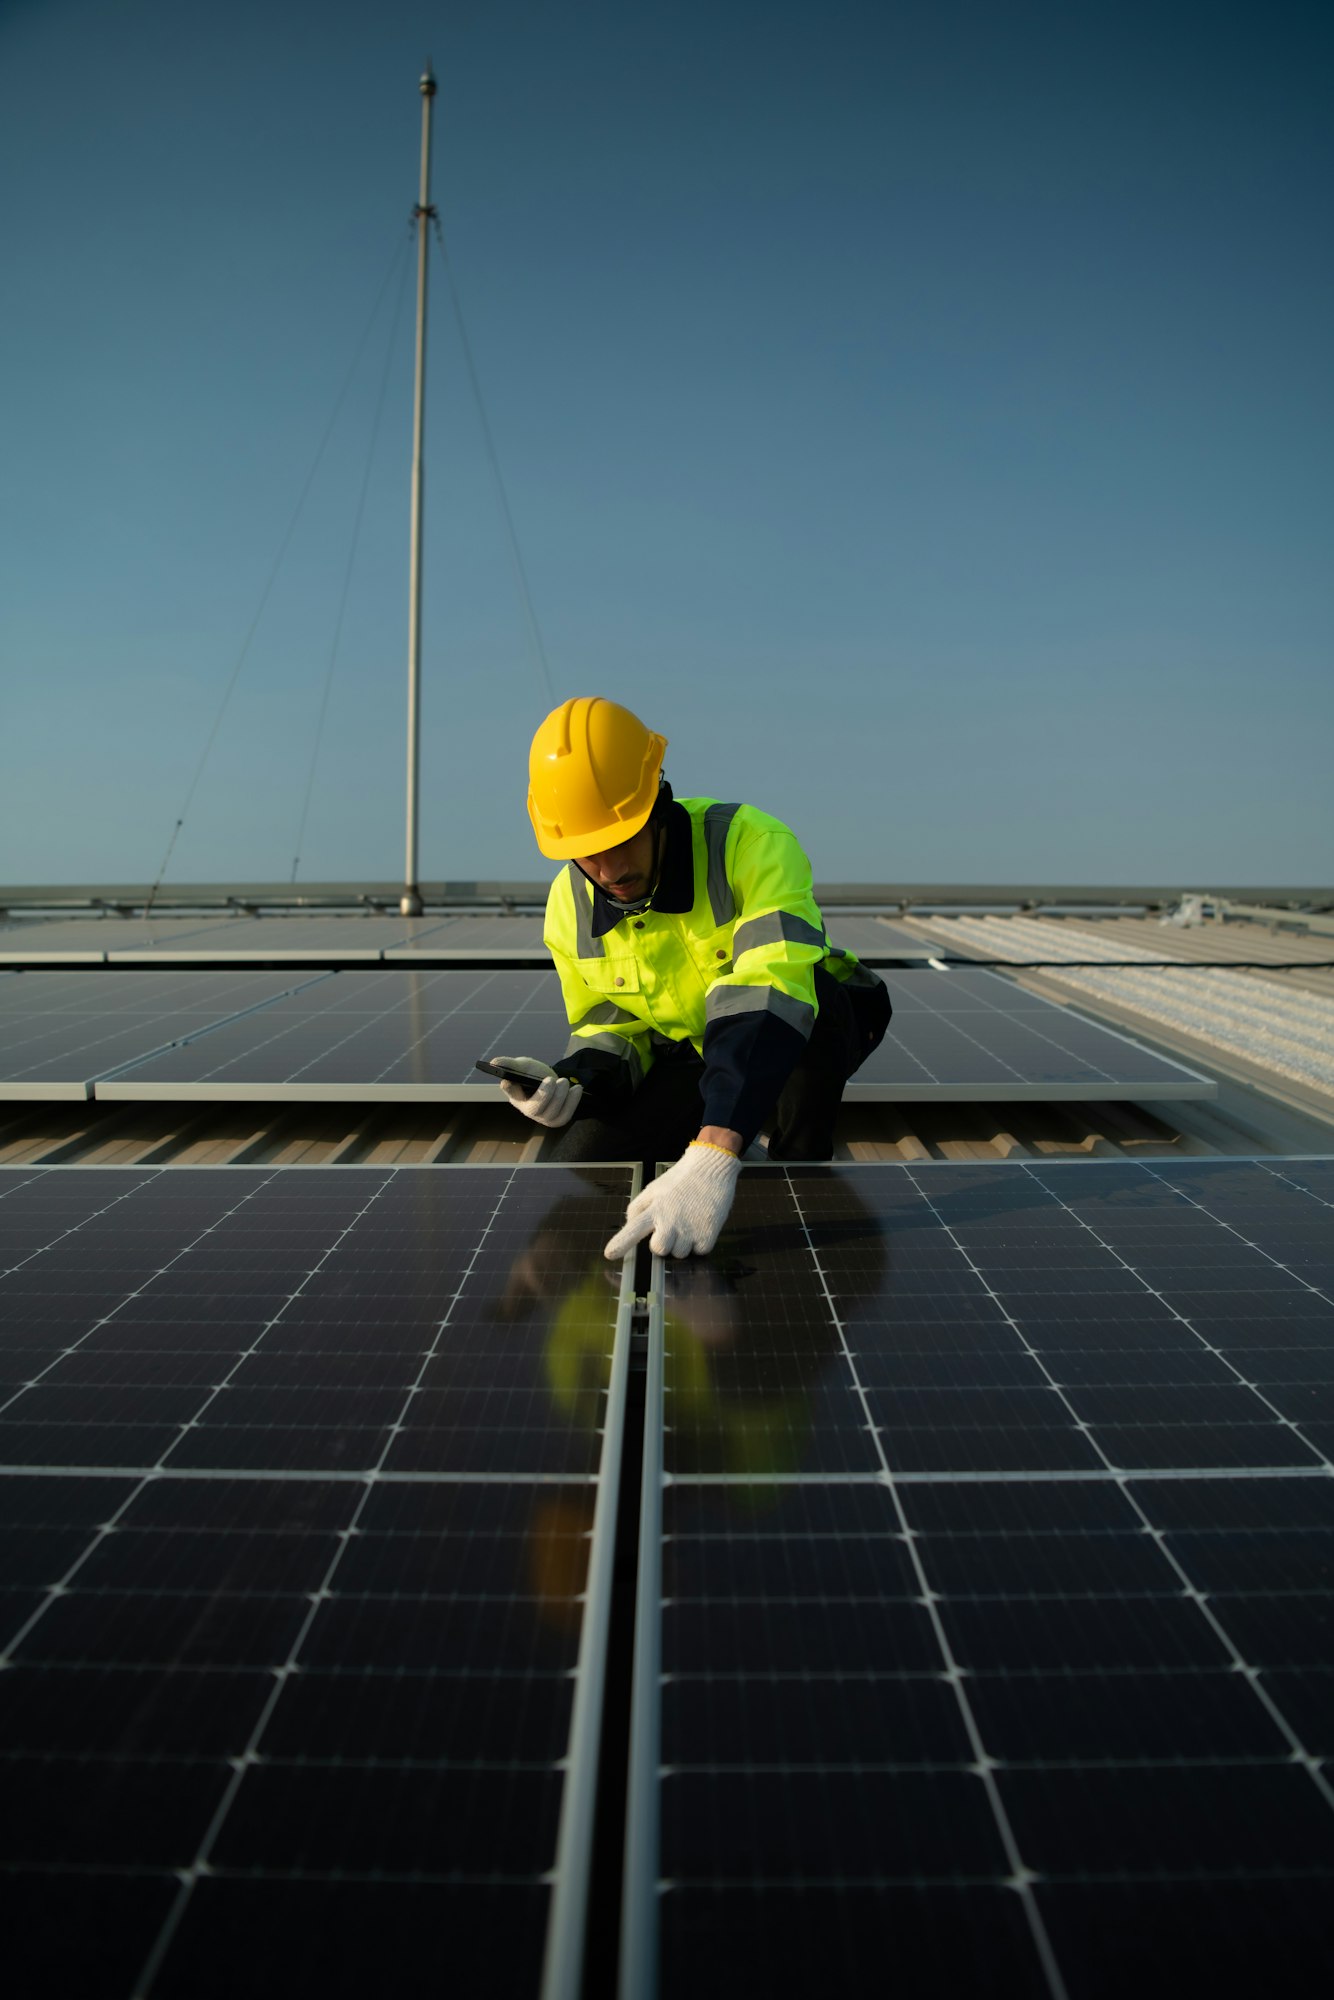 Technicians provide quarterly solar cell maintenance services on the factory roof